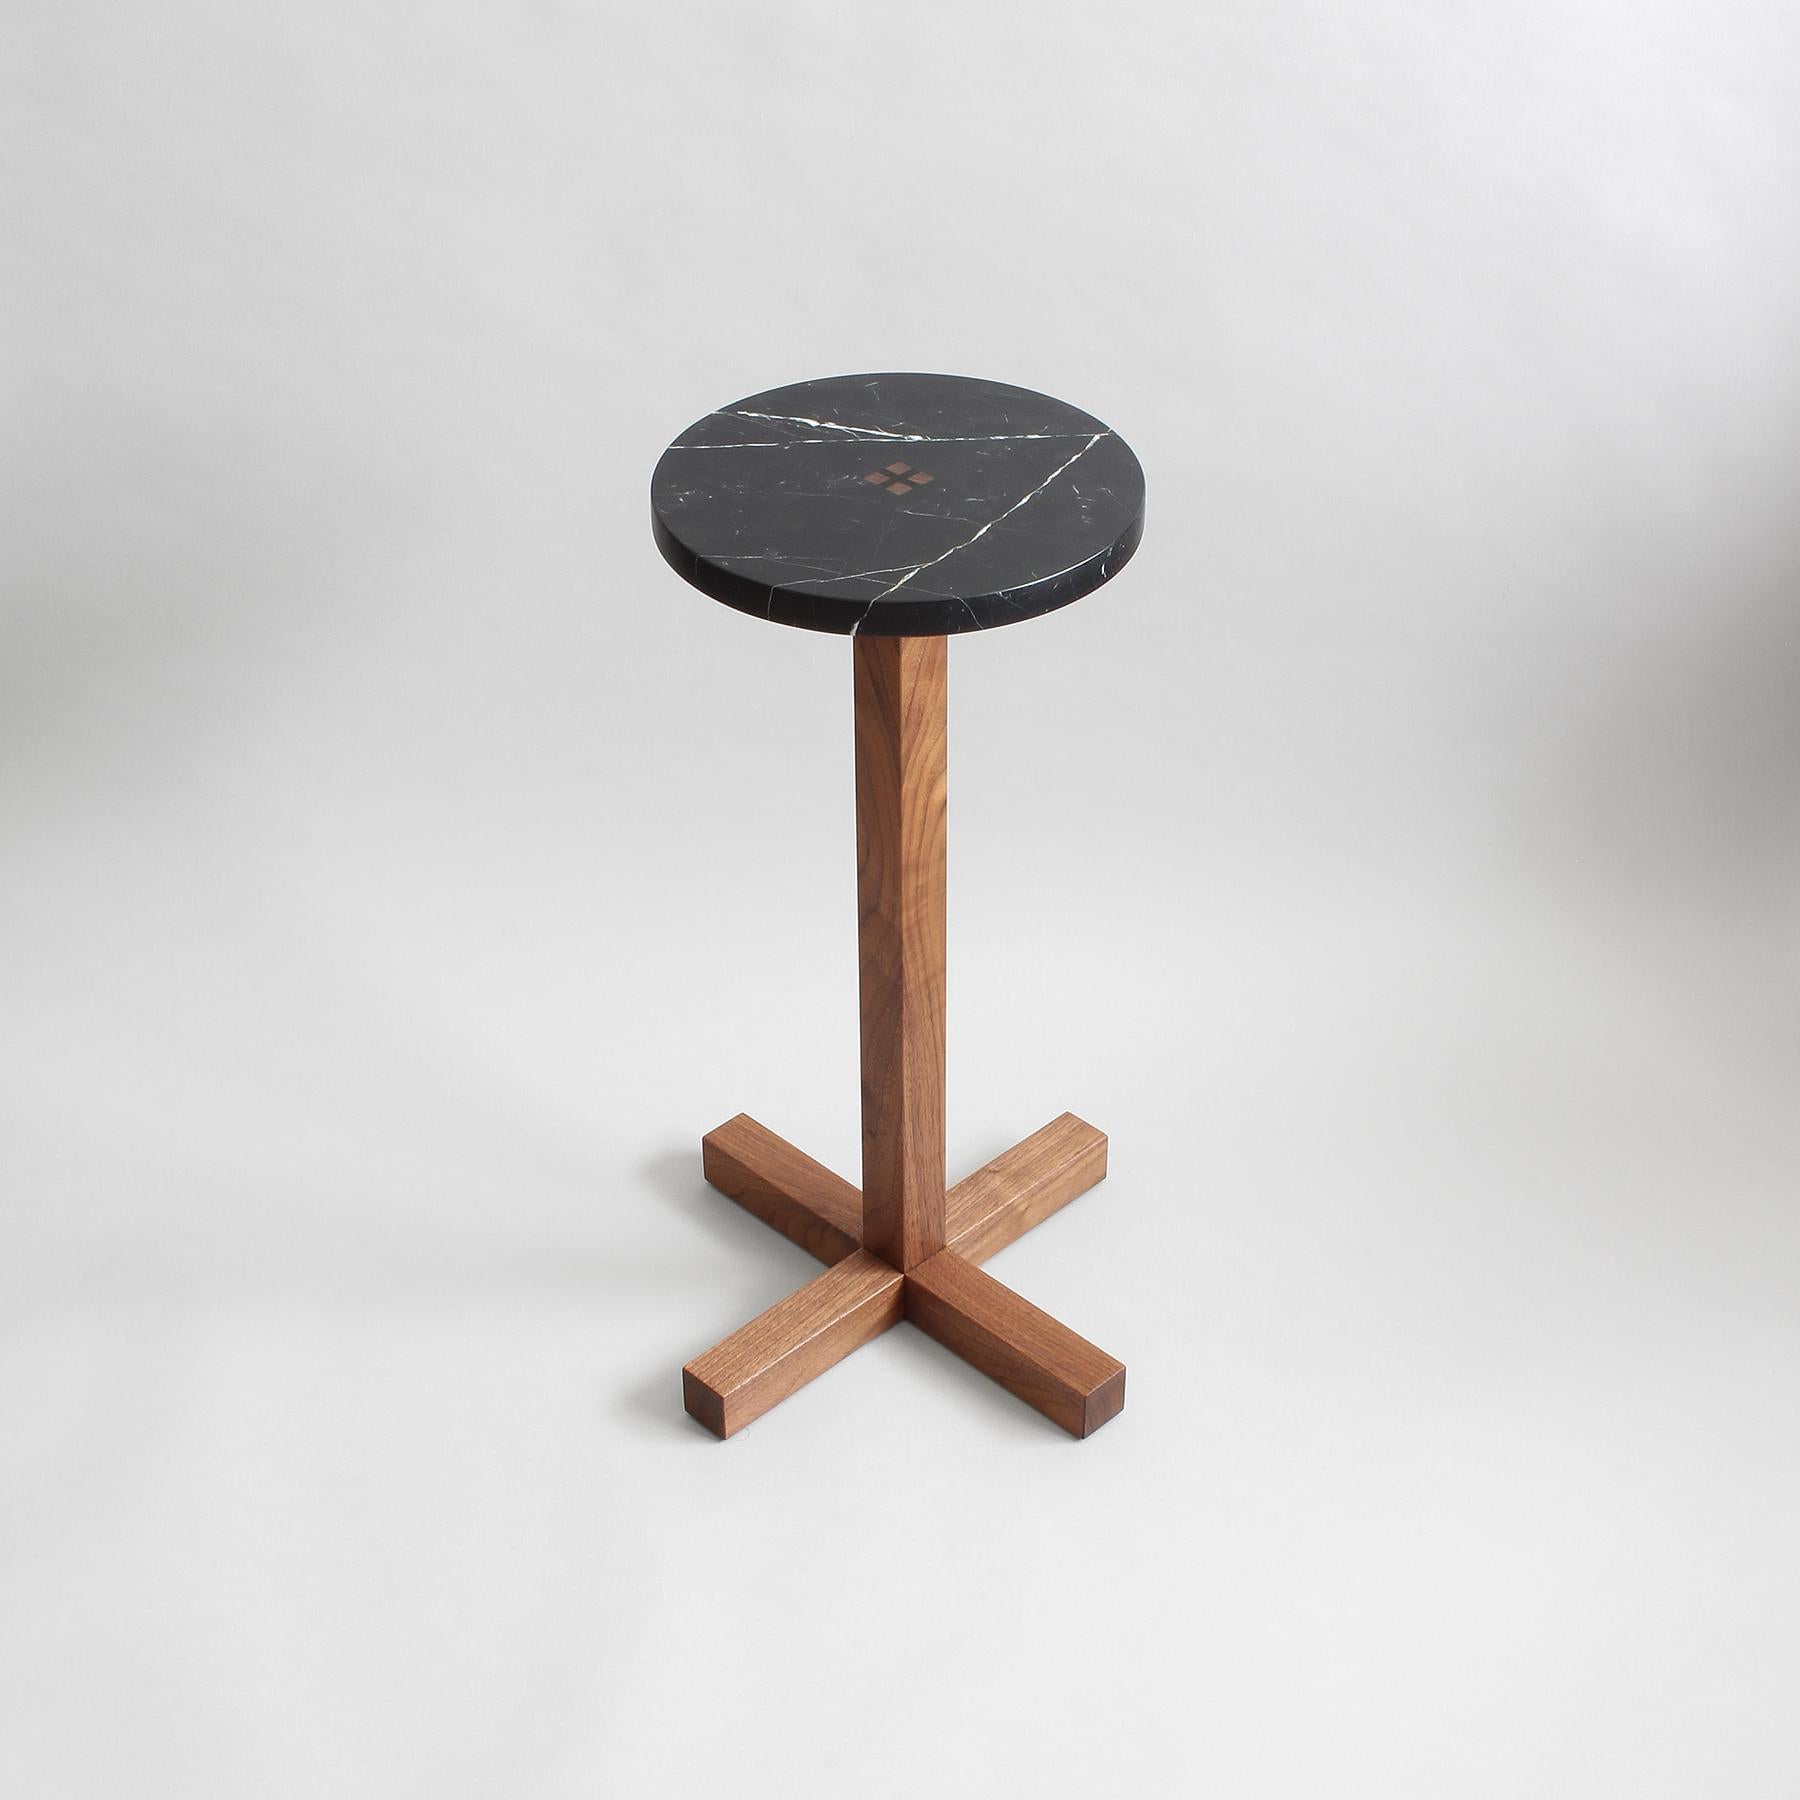 Drink Table with black marble top joined to a solid walnut base. Ebony wedges at center table top are driven permanently into place to combine stone top with wood base. The wood base is constructed with traditional Japanese joinery for structure